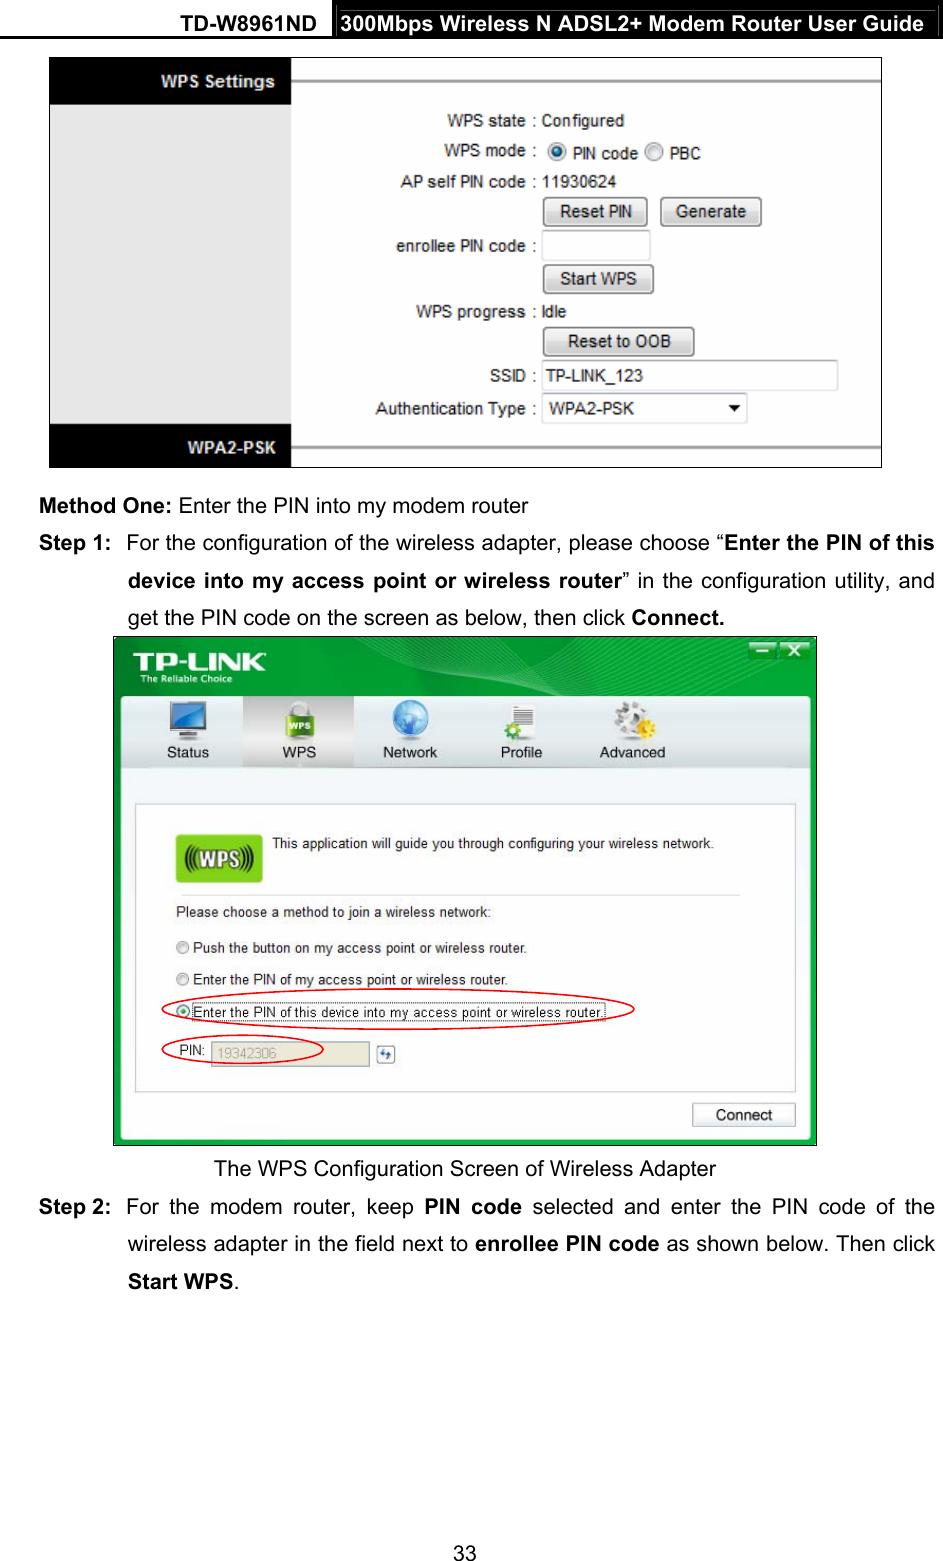 TD-W8961ND  300Mbps Wireless N ADSL2+ Modem Router User Guide  33 Method One: Enter the PIN into my modem router Step 1:  For the configuration of the wireless adapter, please choose “Enter the PIN of this device into my access point or wireless router” in the configuration utility, and get the PIN code on the screen as below, then click Connect.    The WPS Configuration Screen of Wireless Adapter Step 2:  For the modem router, keep PIN code selected and enter the PIN code of the wireless adapter in the field next to enrollee PIN code as shown below. Then click Start WPS. 